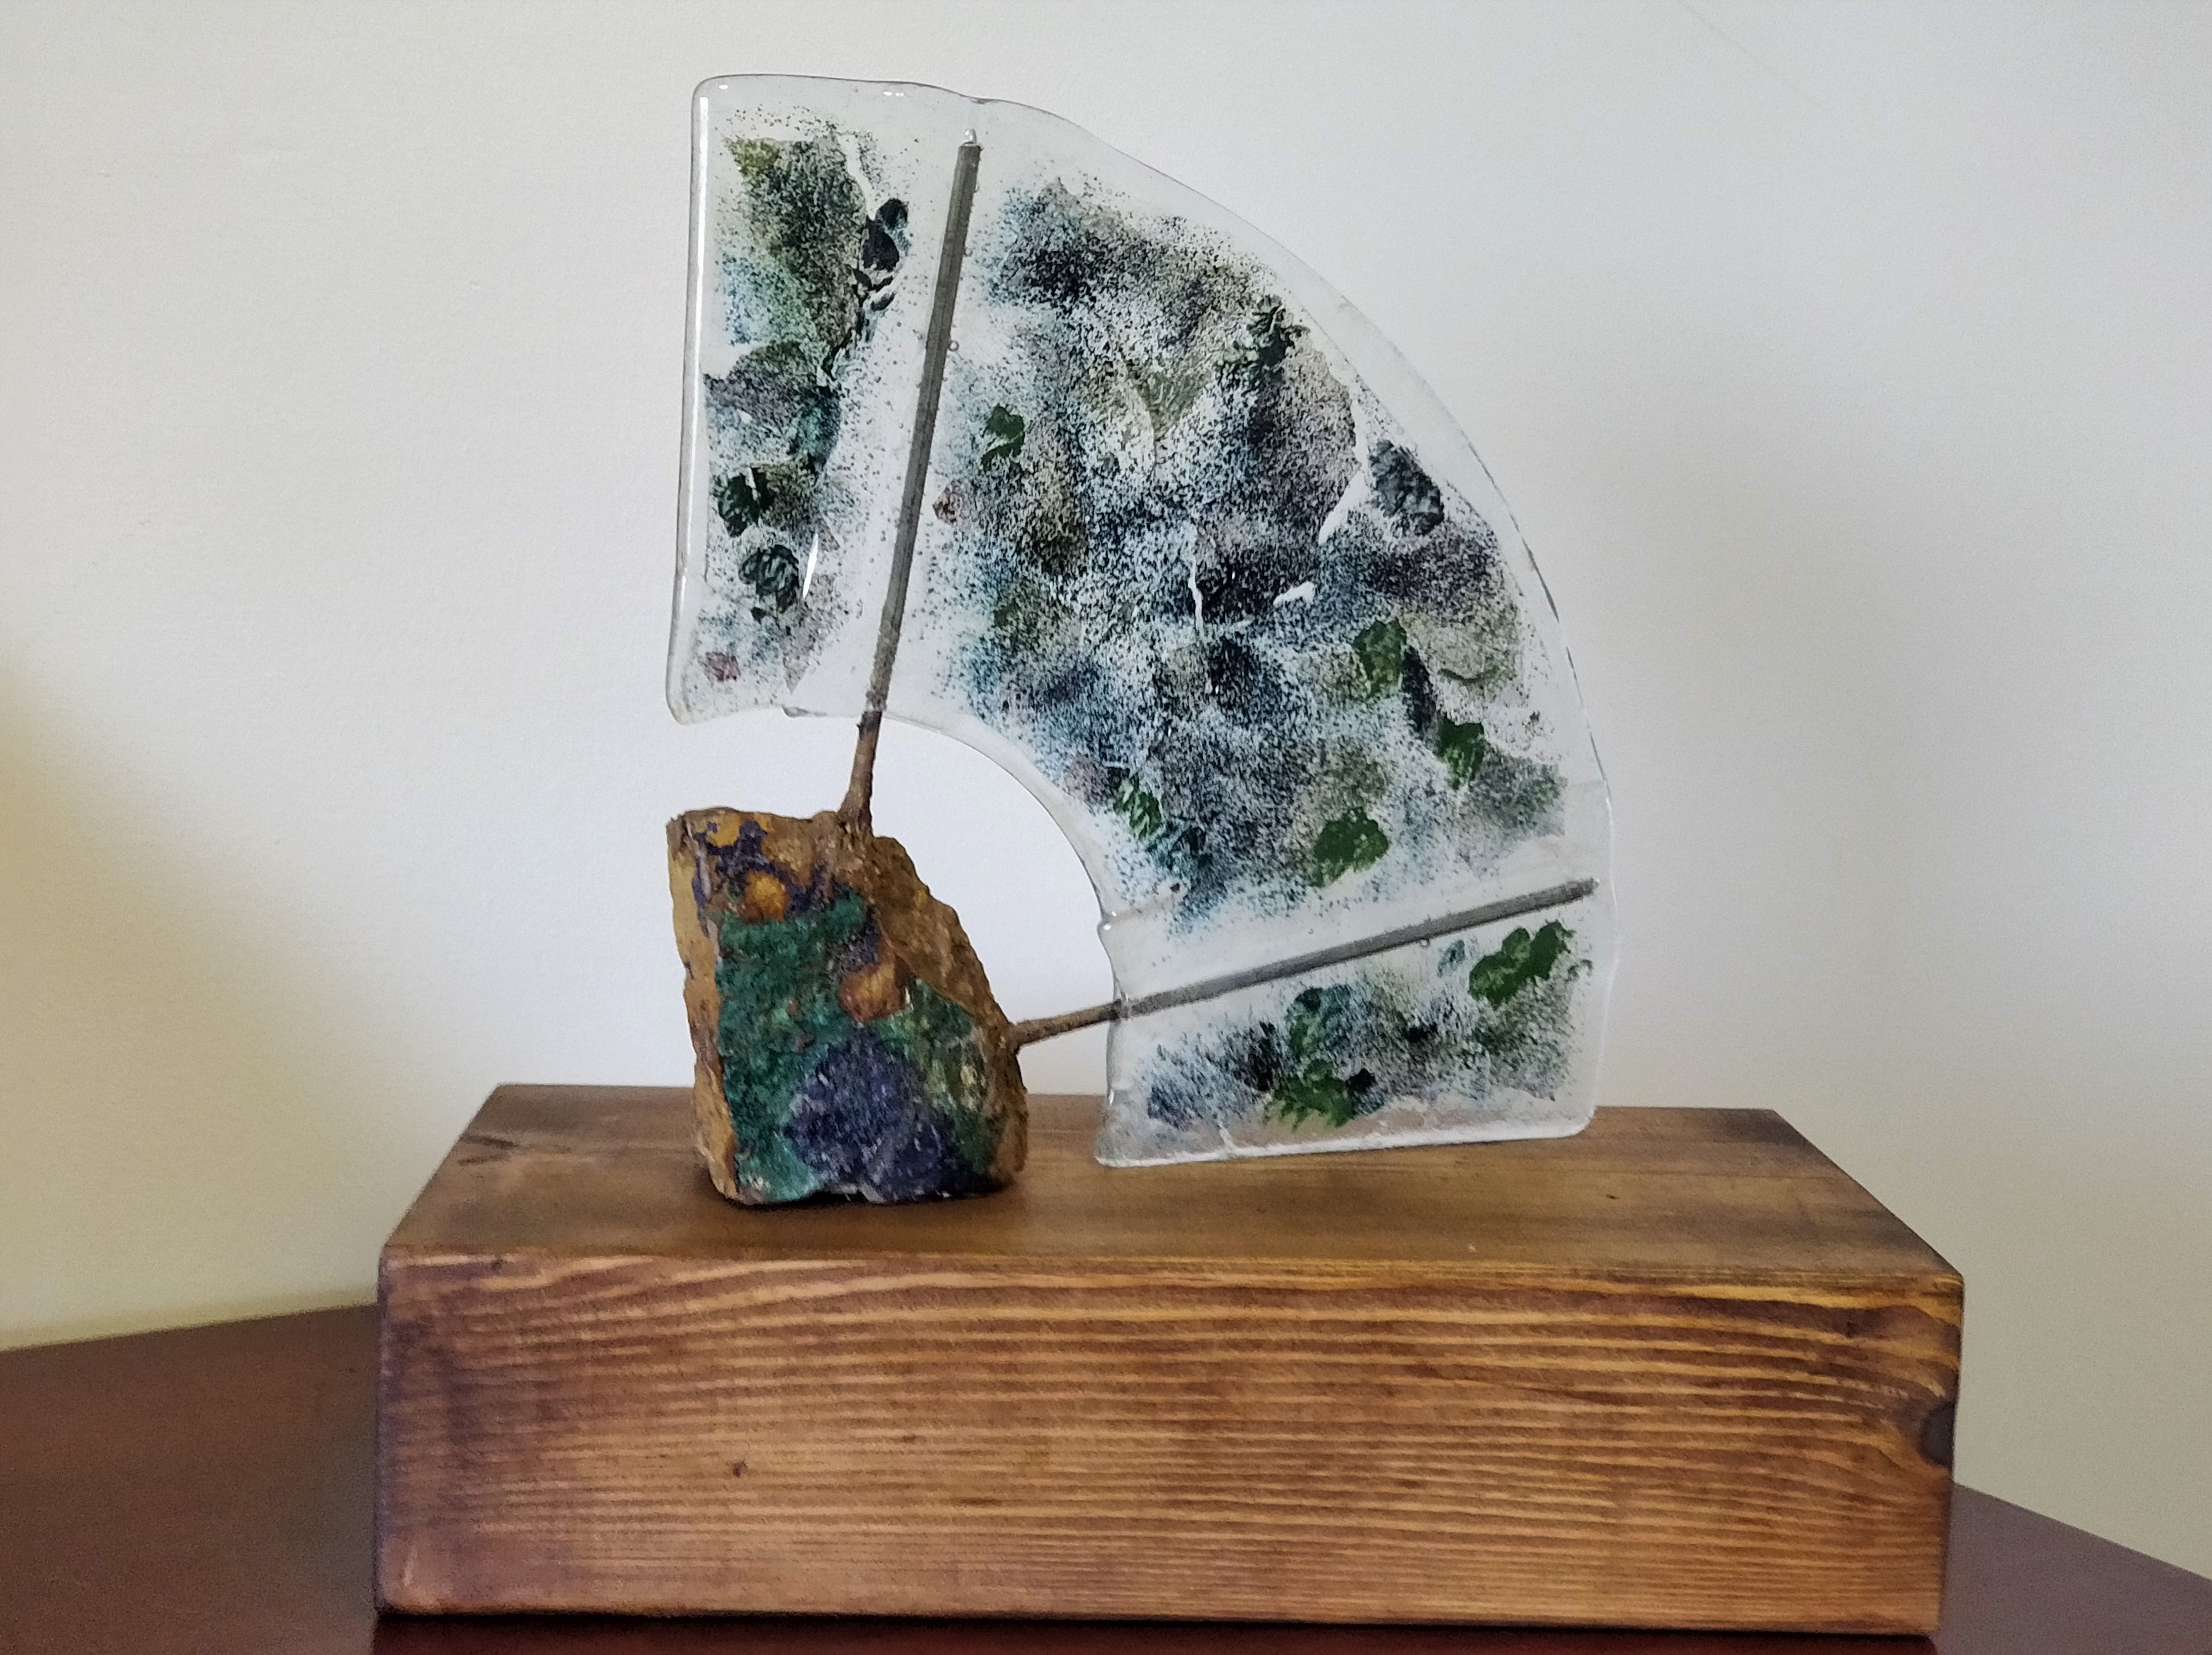 Glass Vase with Wooden Base Of An Ode to Minerals Made Of Rock Fused Glass and Metal On Wooden with Regard to An Ode to Minerals Made Of Rock Fused Glass and Metal On Wooden Base by Beth Erez 35x36x18 Cm